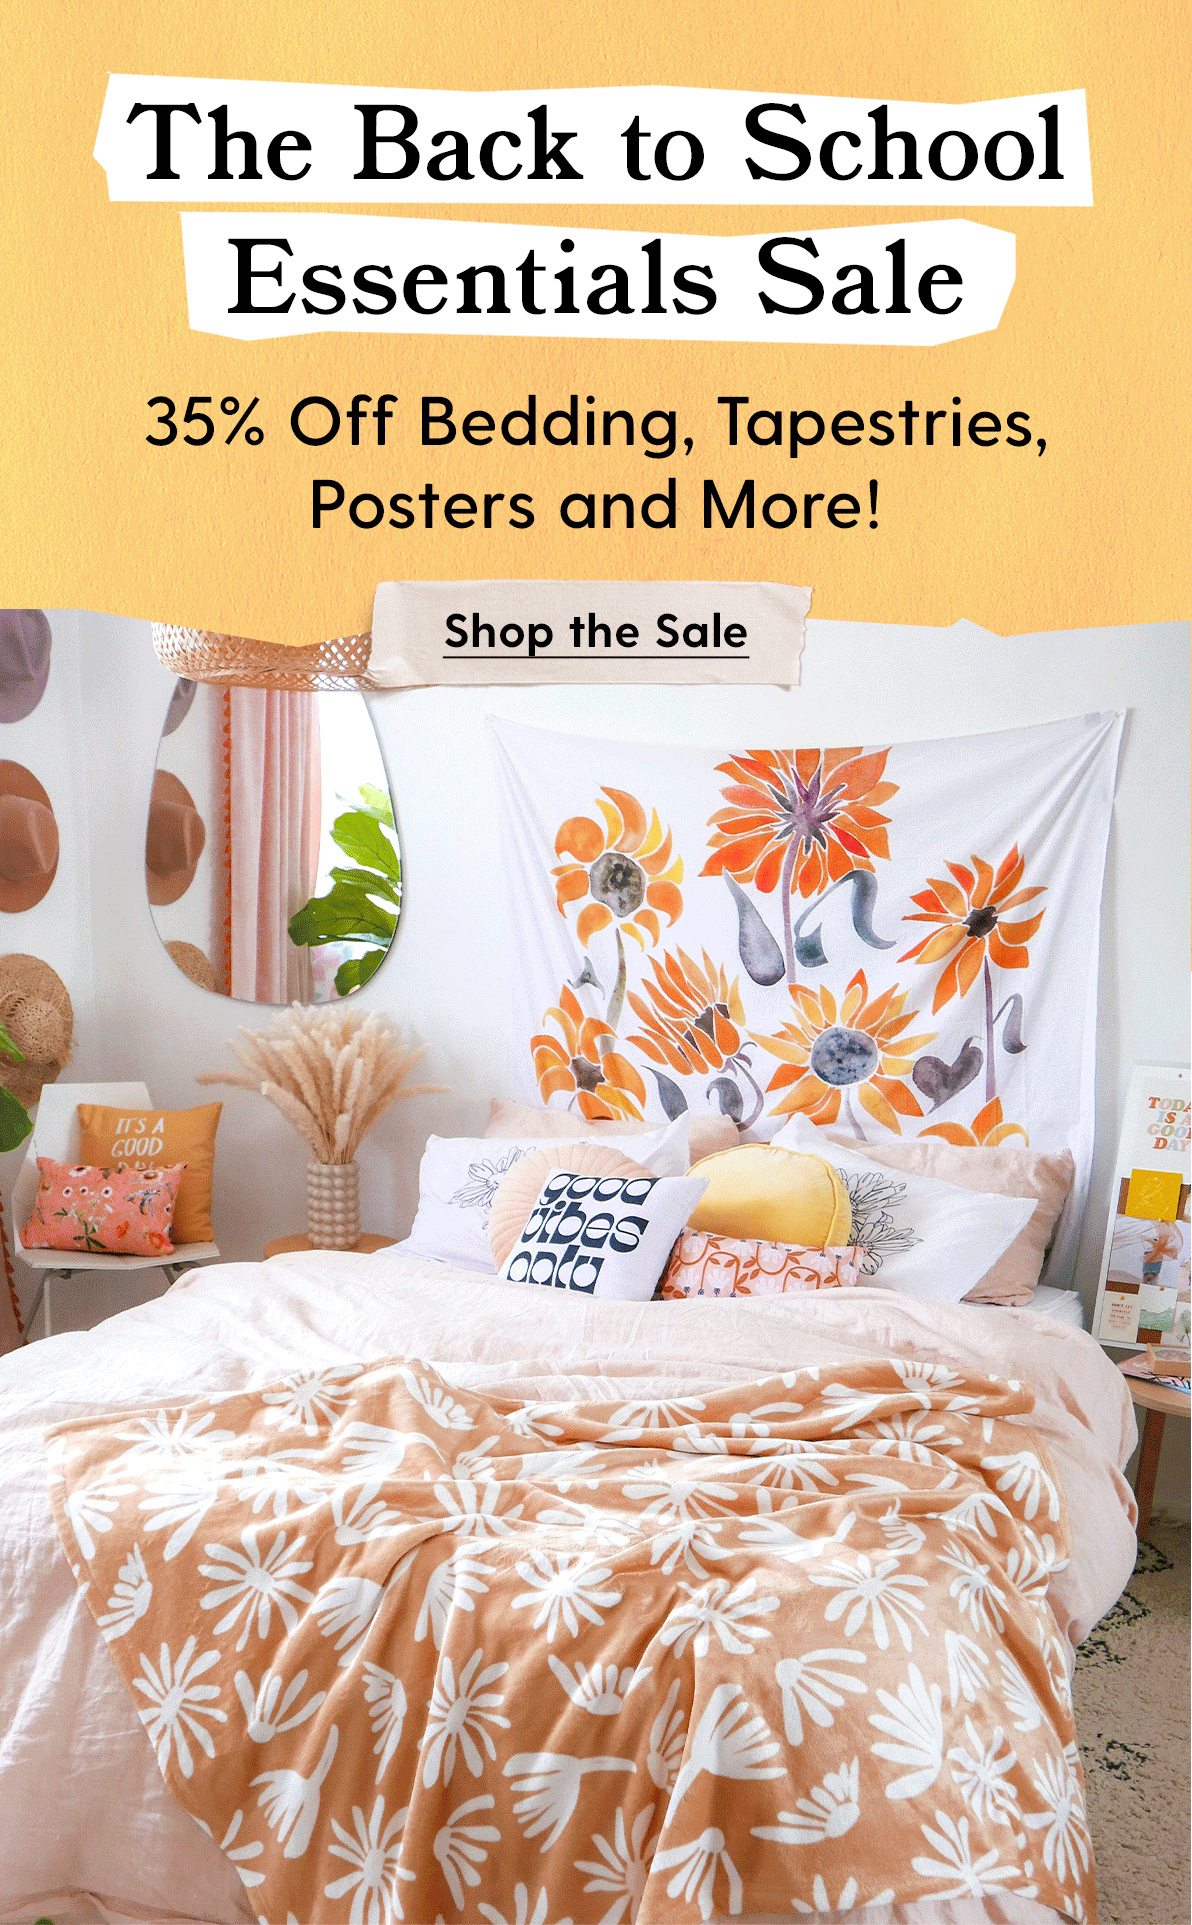 The Back to School Essentials Sale 35% Off Bedding, Tapestries, Posters and More! Shop the Sale